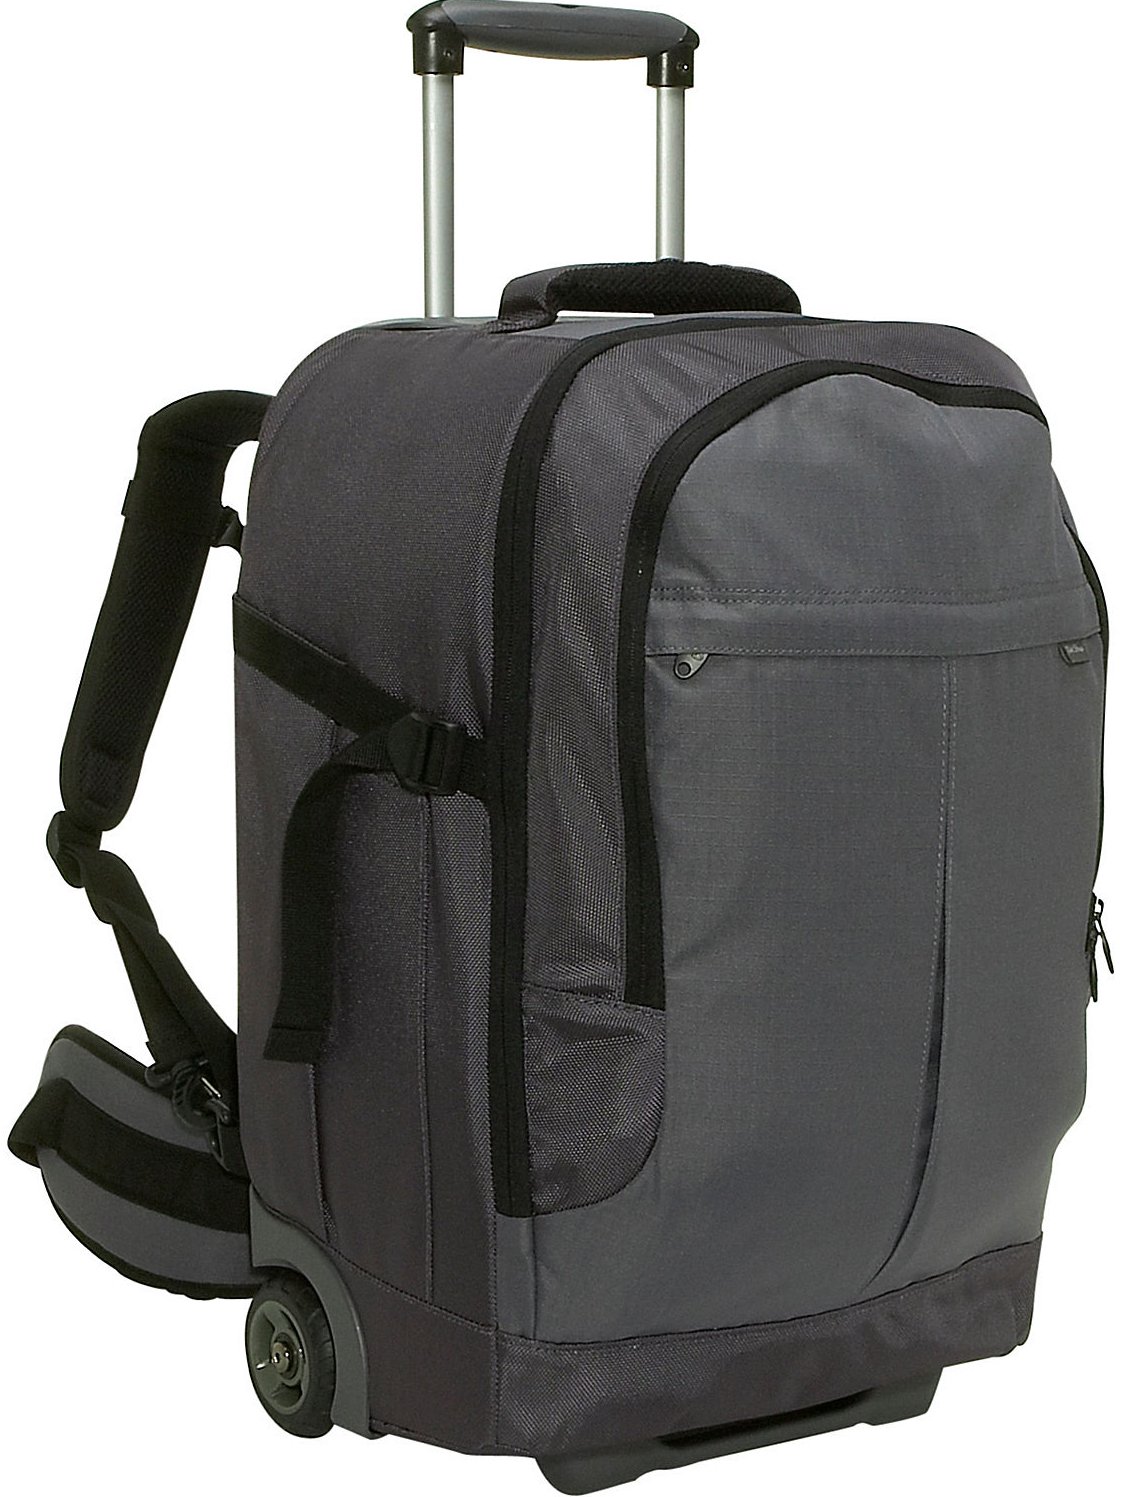 rick steves travel bags and accessories